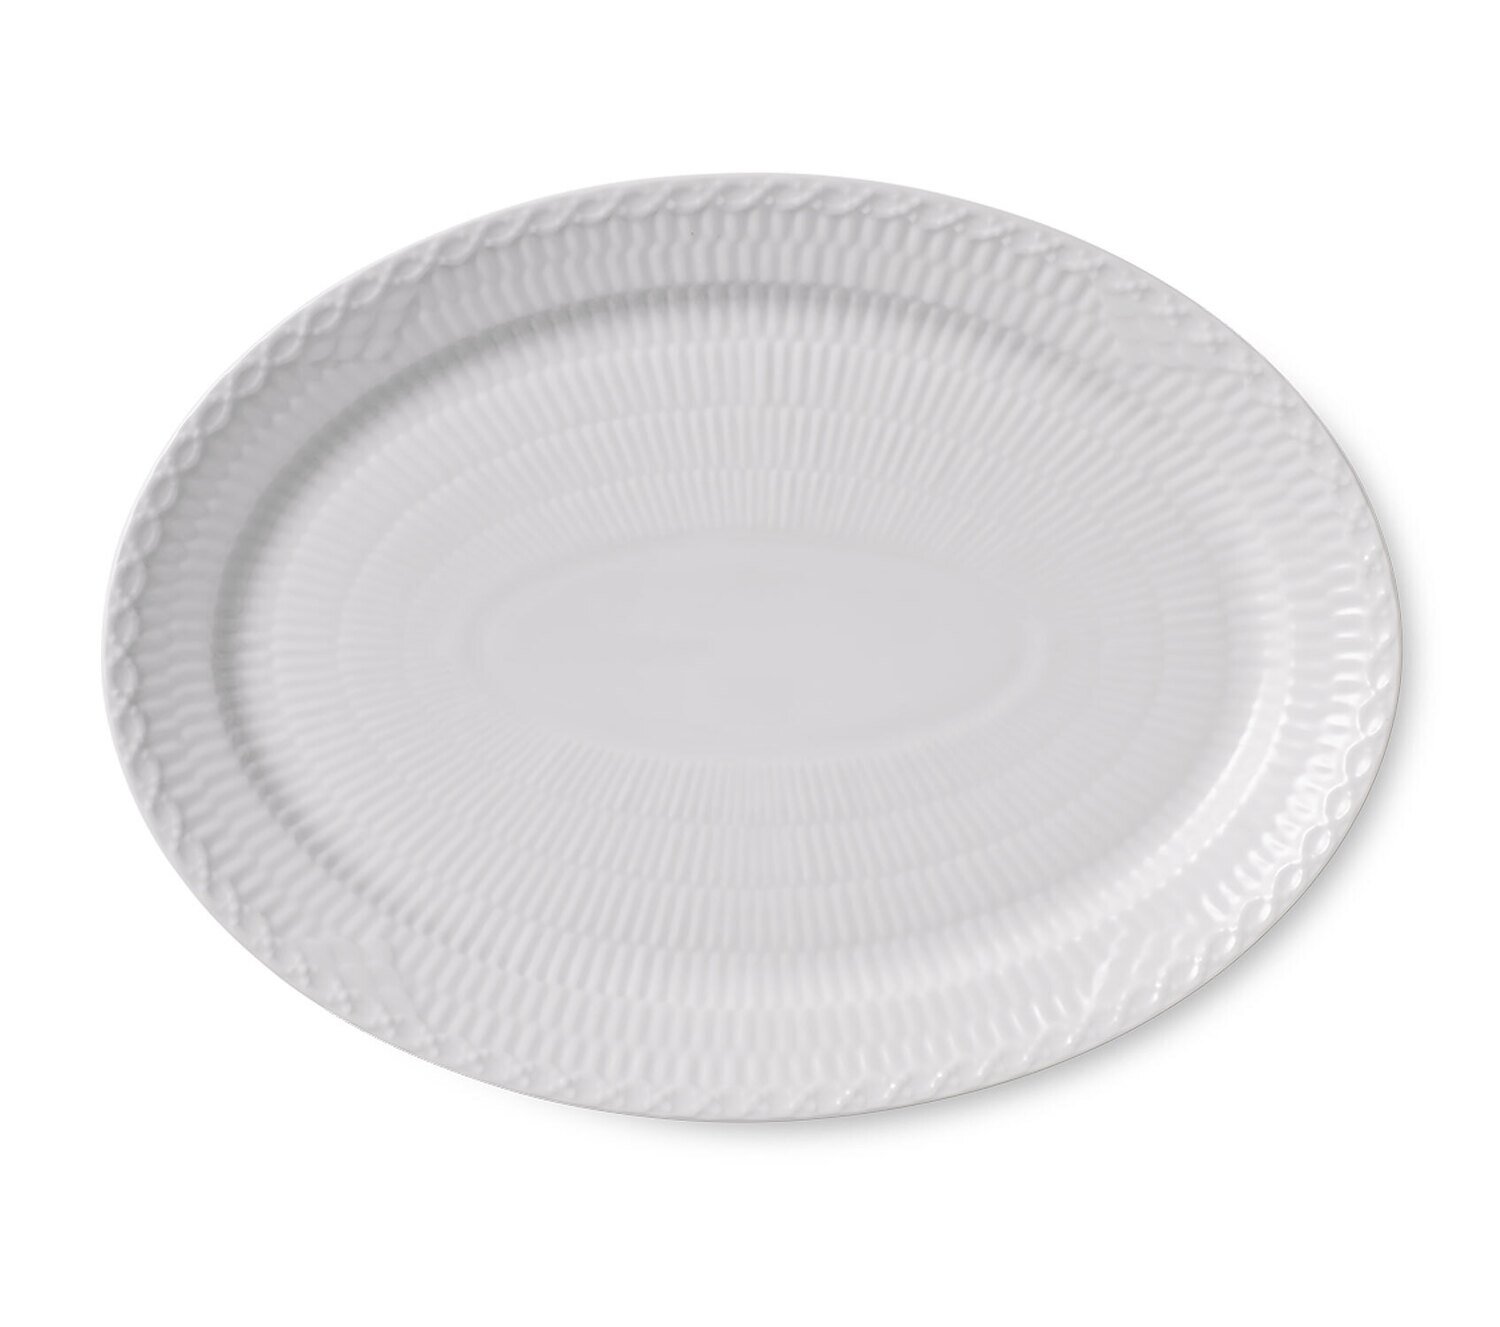 Royal Copenhagen White Fluted Half Lace Oval Plate 11 Inch 1016792